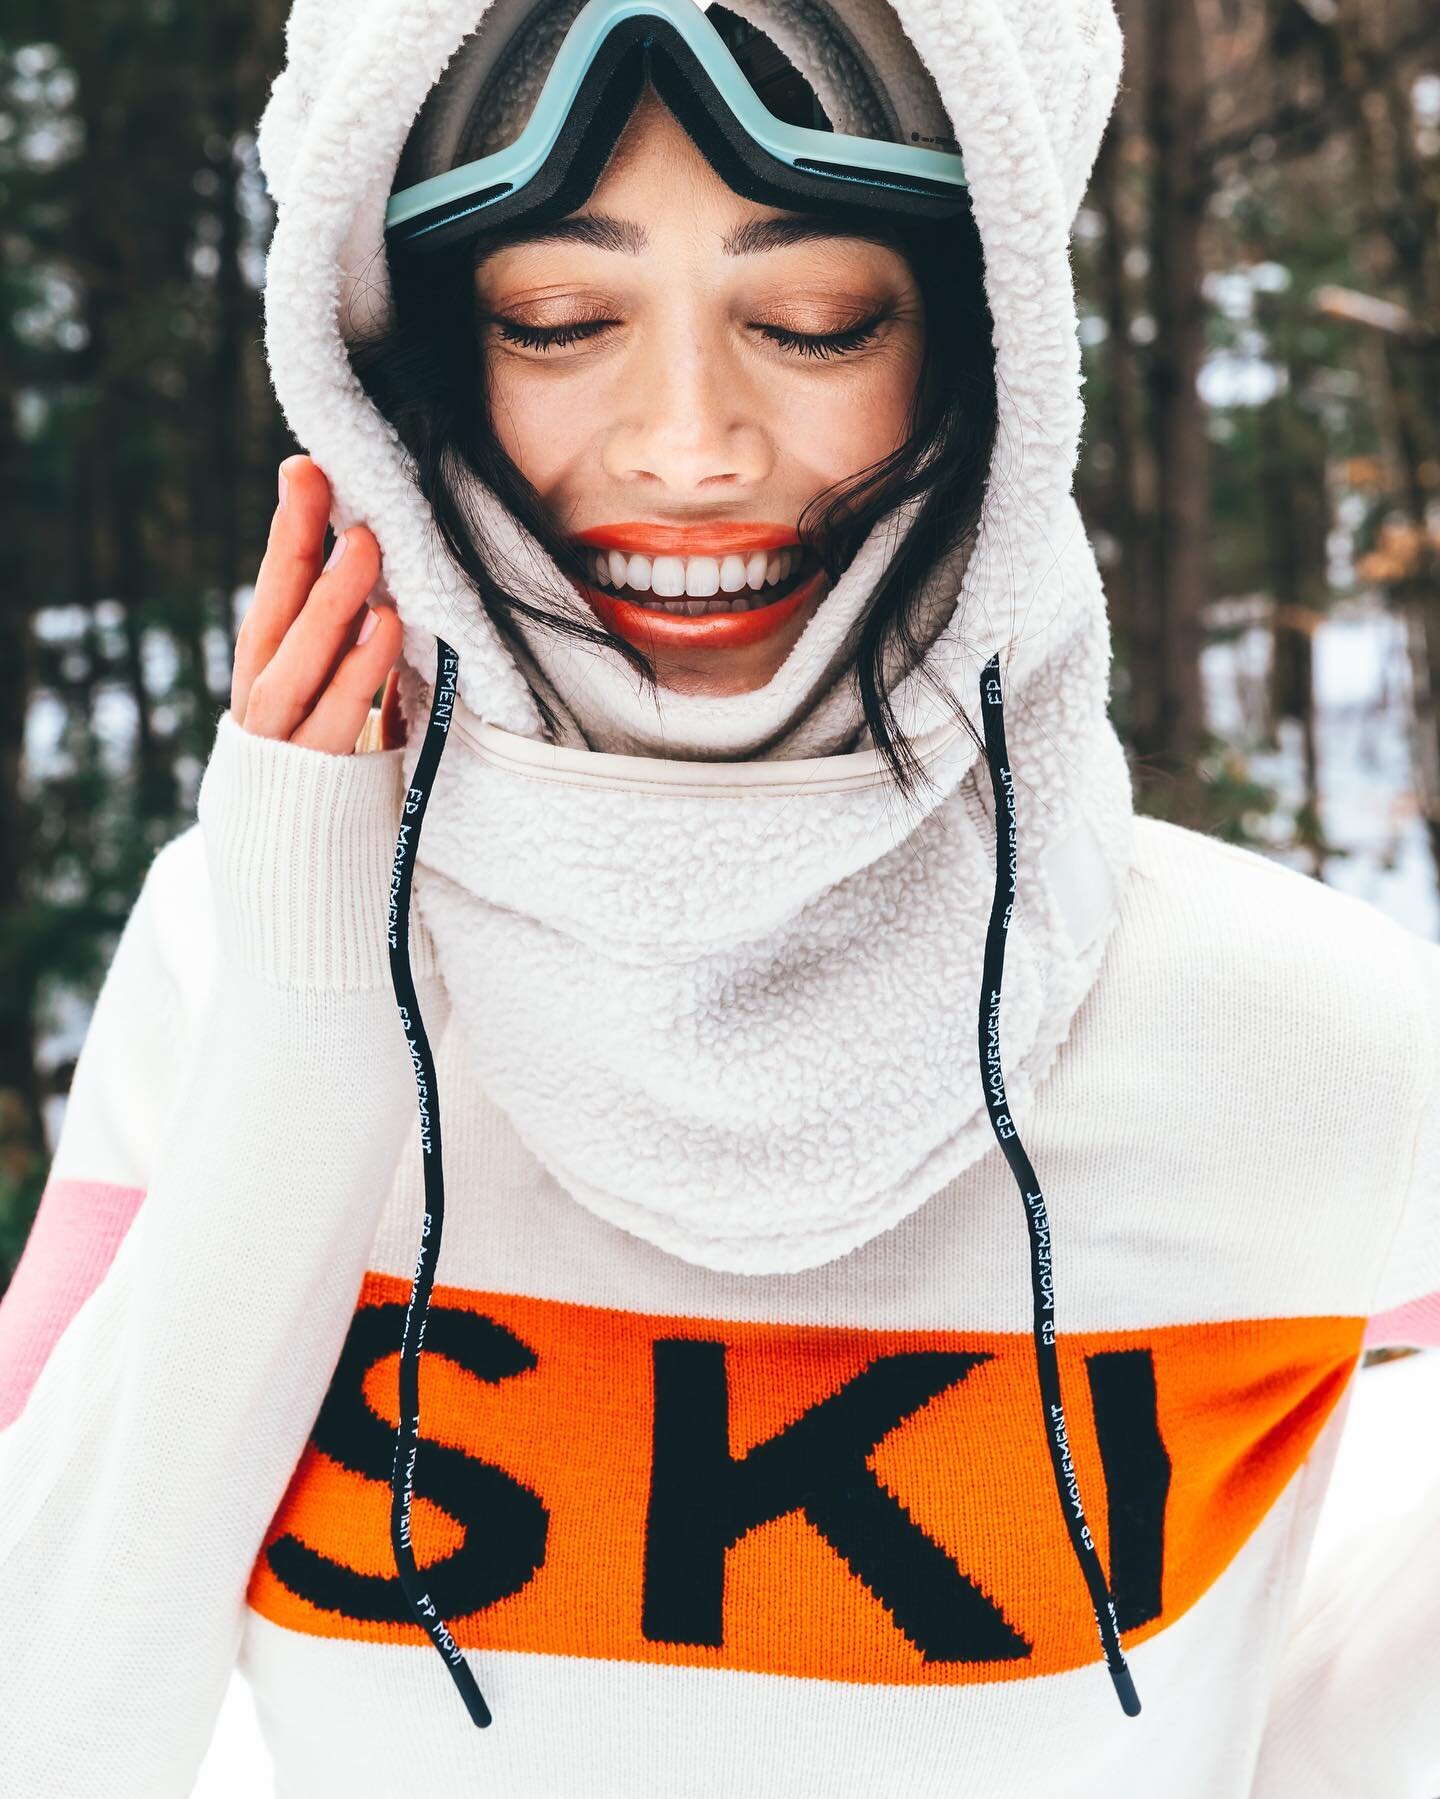 Le ski ❄️ 

Snaps from a campaign for @howiesspiked. 

Styling + production: @theprismhouse // 📷 @abby_stearns // makeup: @danielle.prism @ms.dheath with @brookeitlist thanks to @stellartalentagencyinc